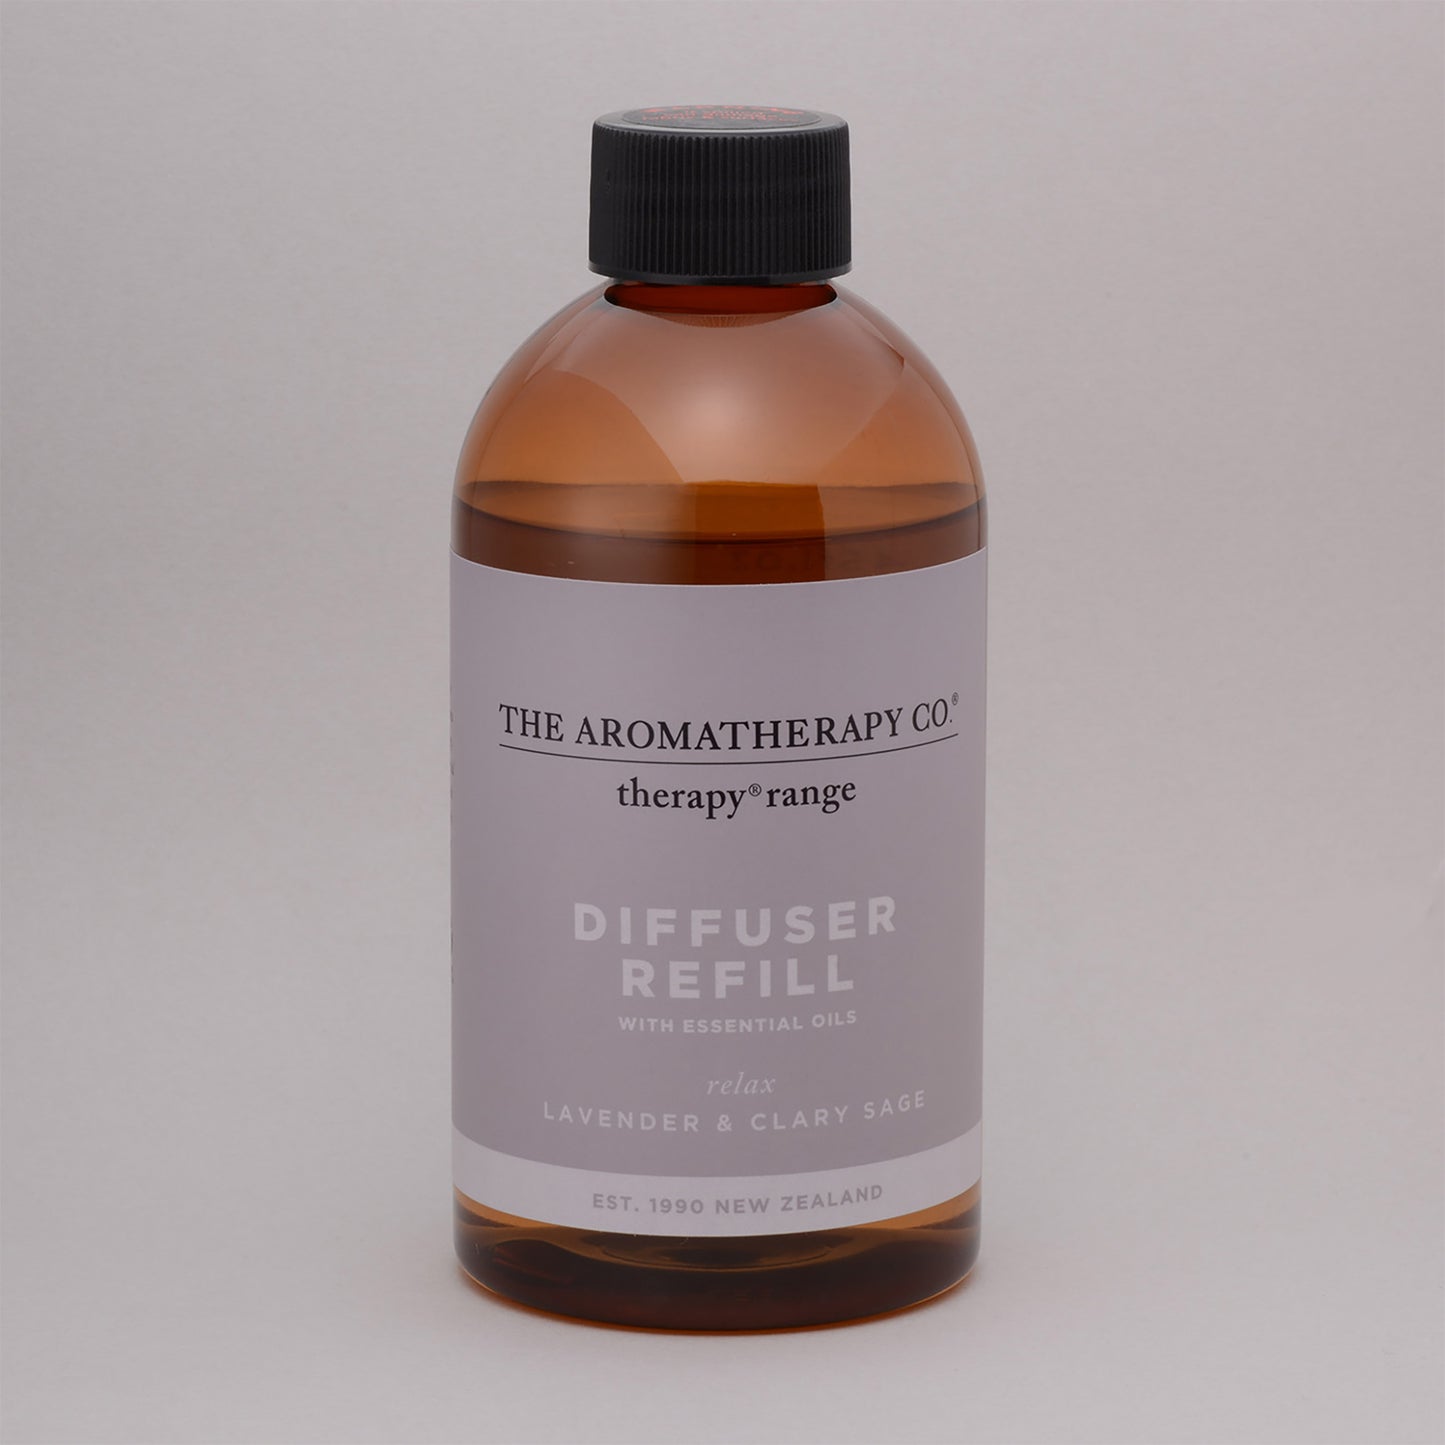 THE AROMATHERAPY CO.　therapy range ディフューザーリフィル　LAVENDER&CLARY SAGE